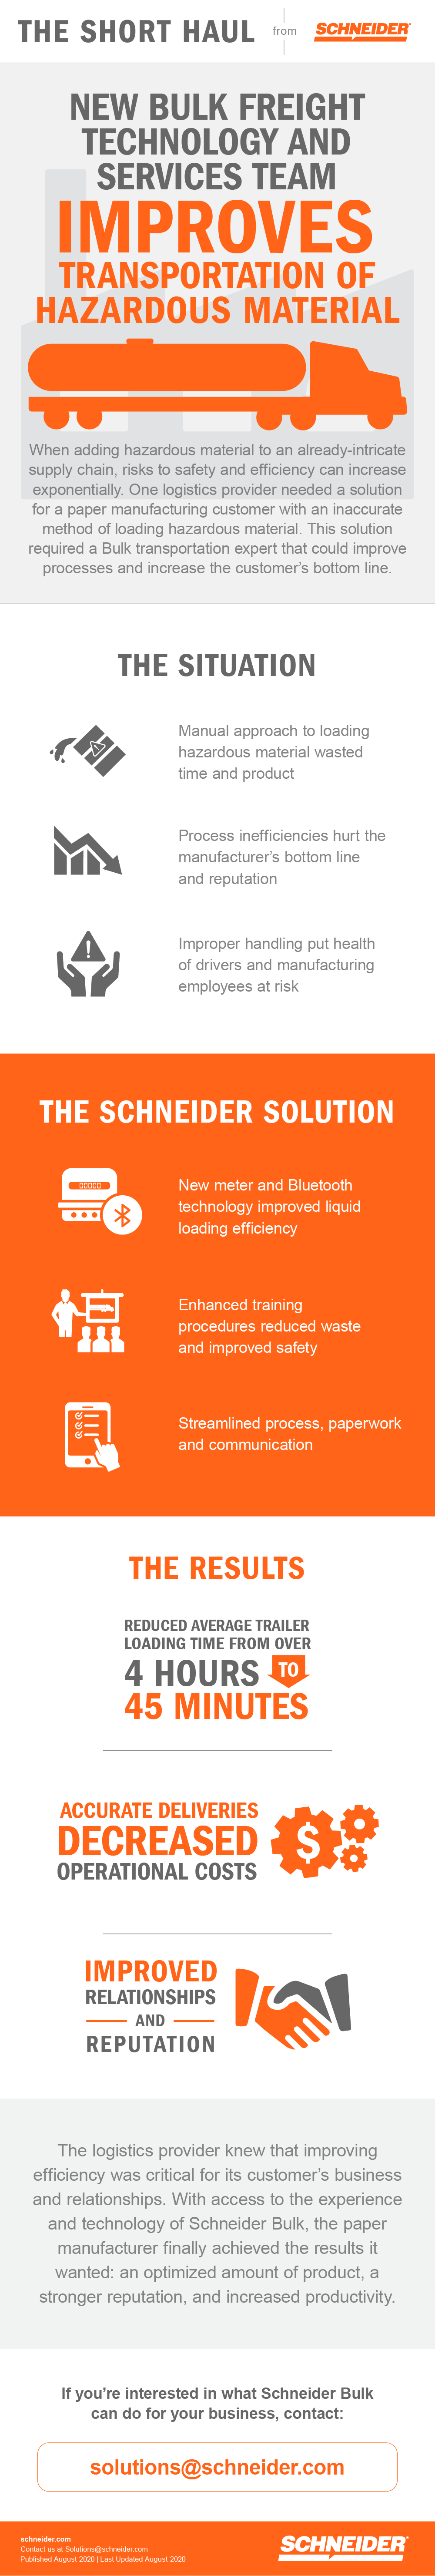 infographic showing how Schneider devised a unique bulk transportation solution that allowed a paper manufacturer to safely transport hazardous material & increase efficiency.